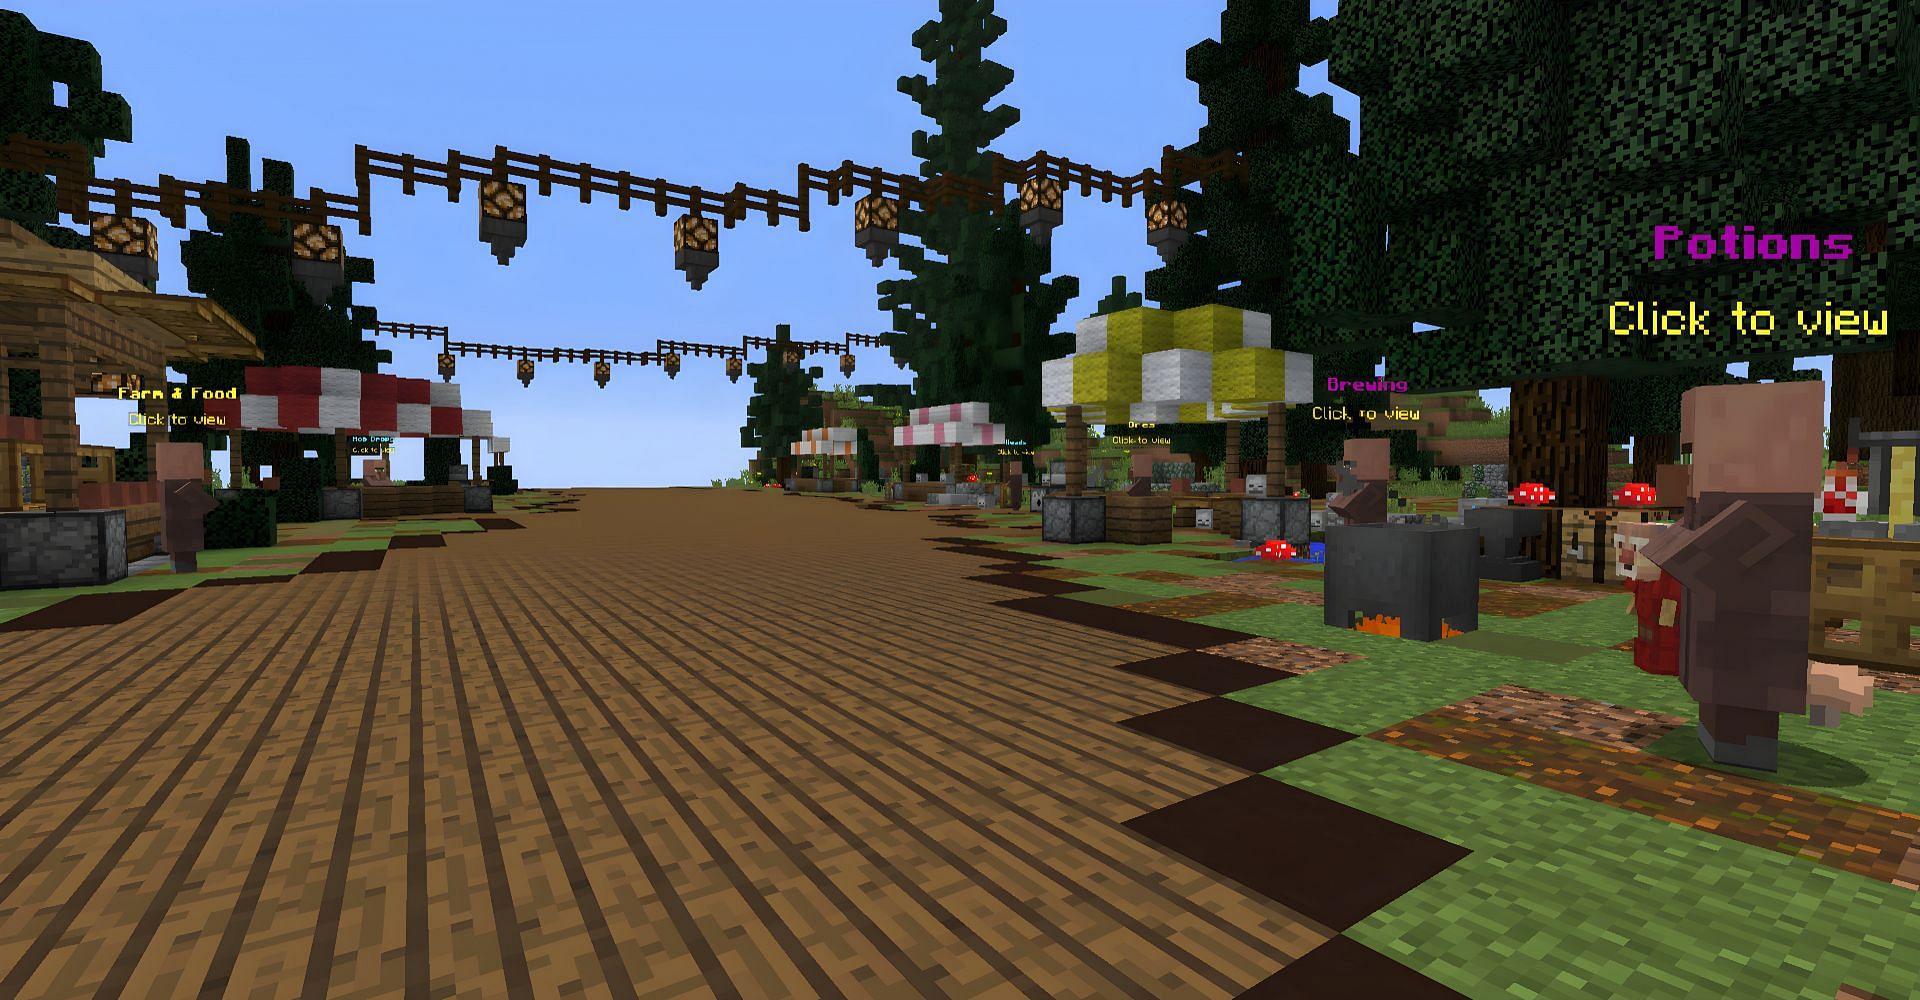 OreoMC is a fantastic survival server for those just starting (Image via Mojang)